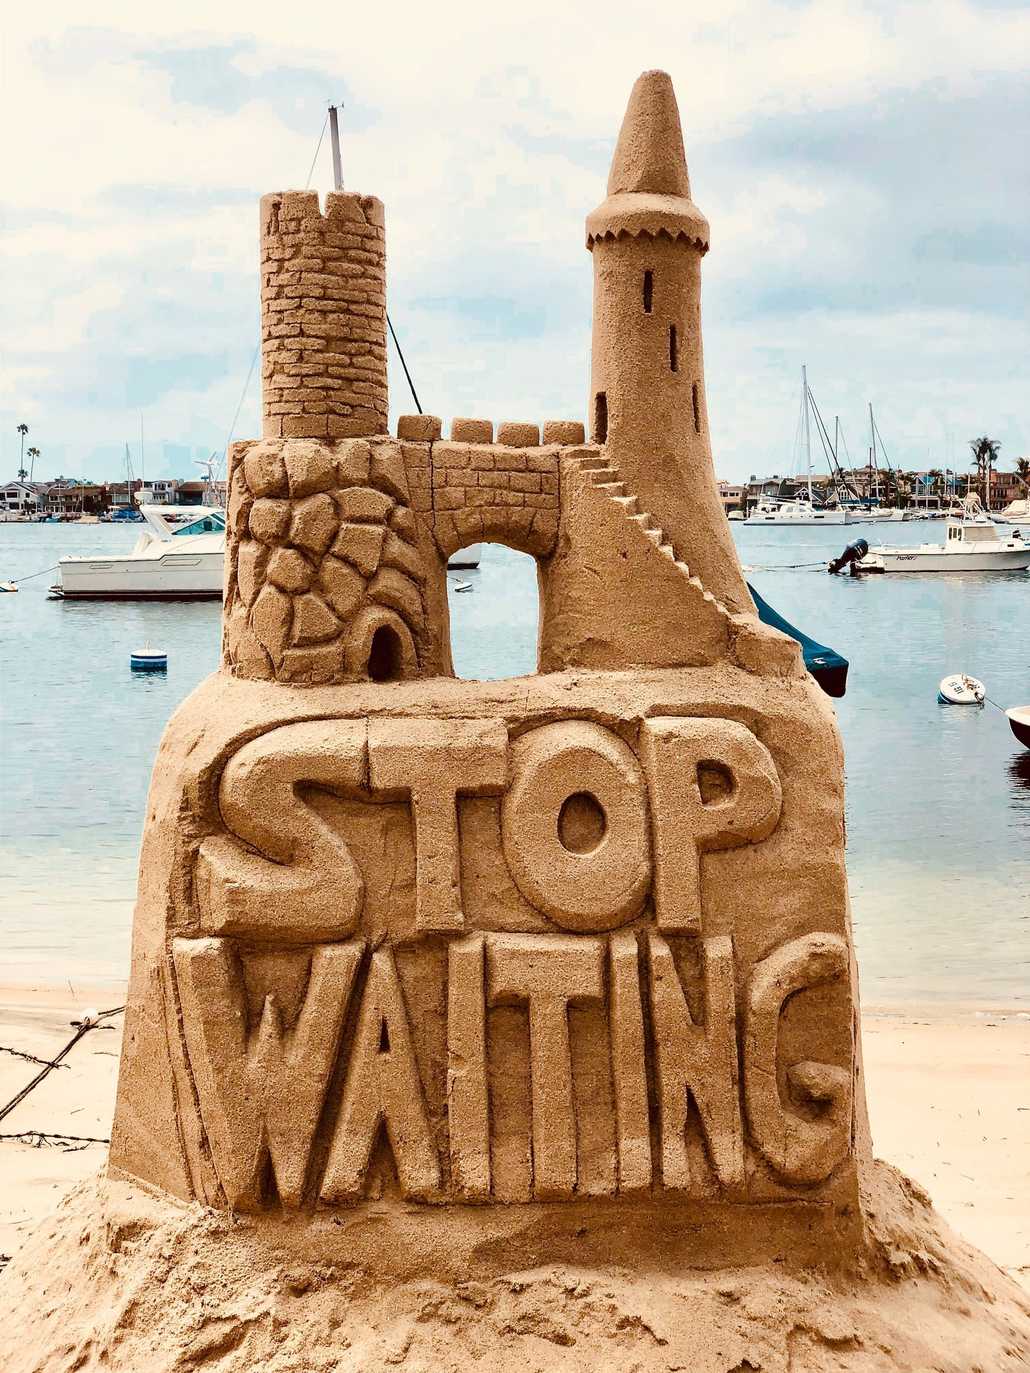 Message: Stop Waiting